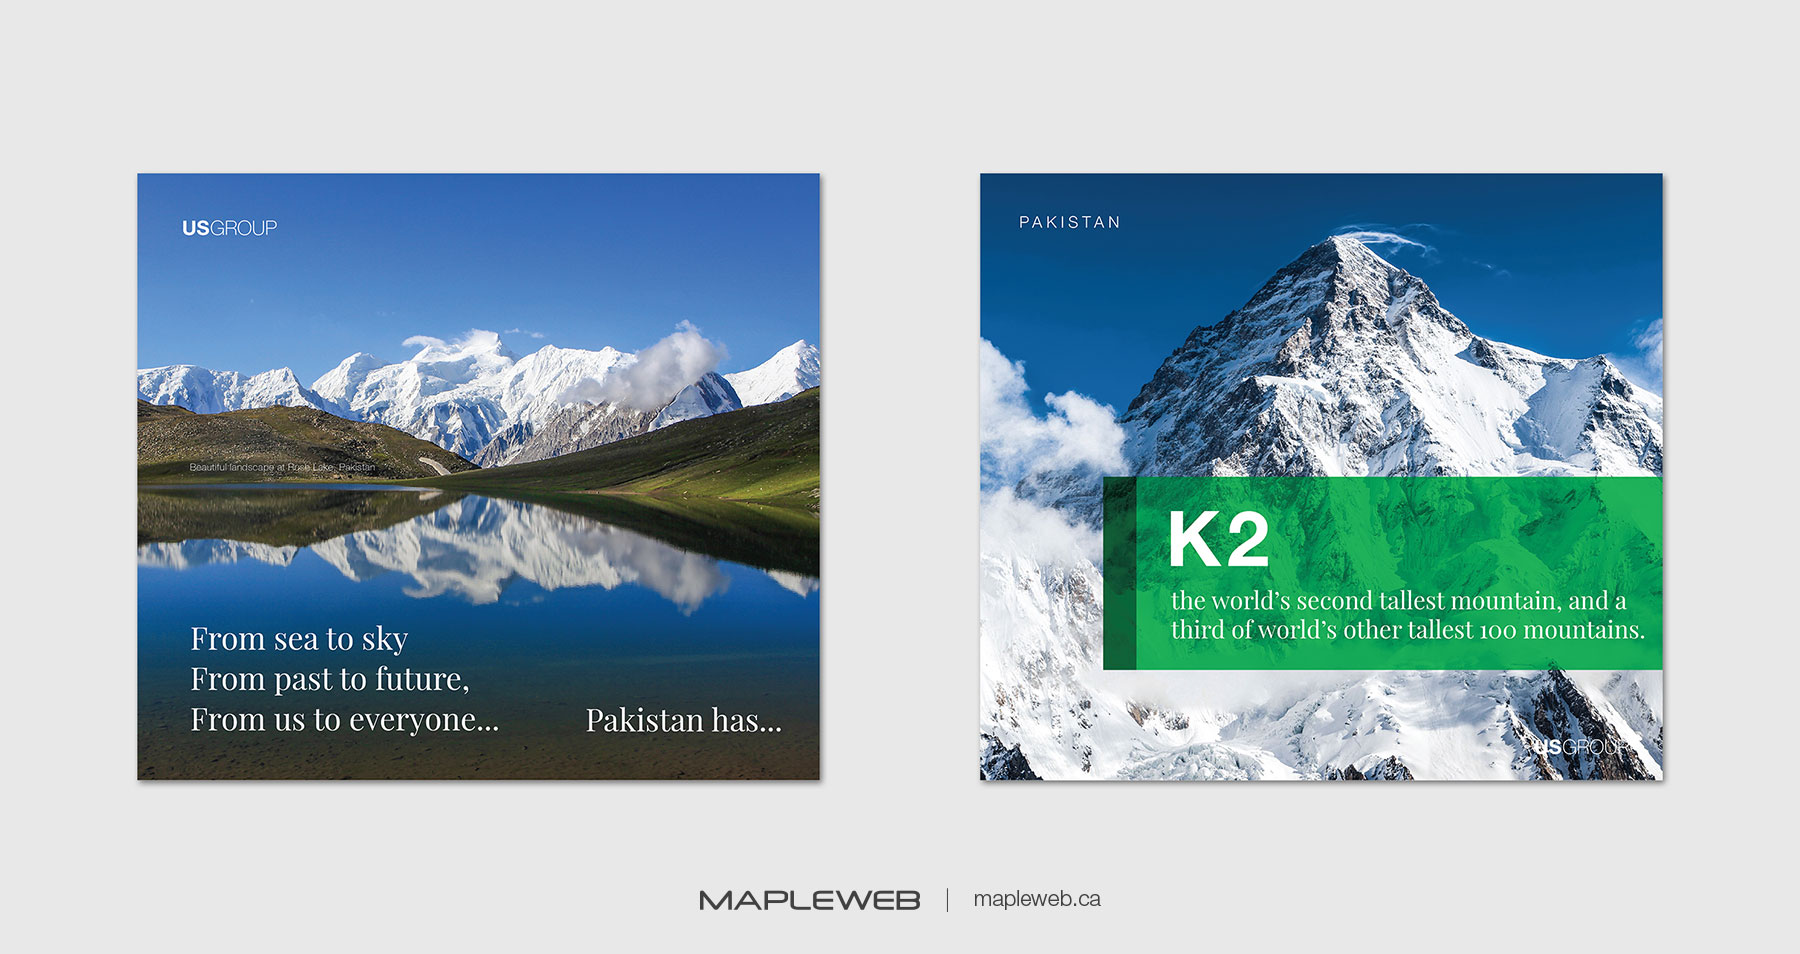 Us Group Brand Magazine Pages Displaying K2 World Second Tallest Mountain design by Mapleweb